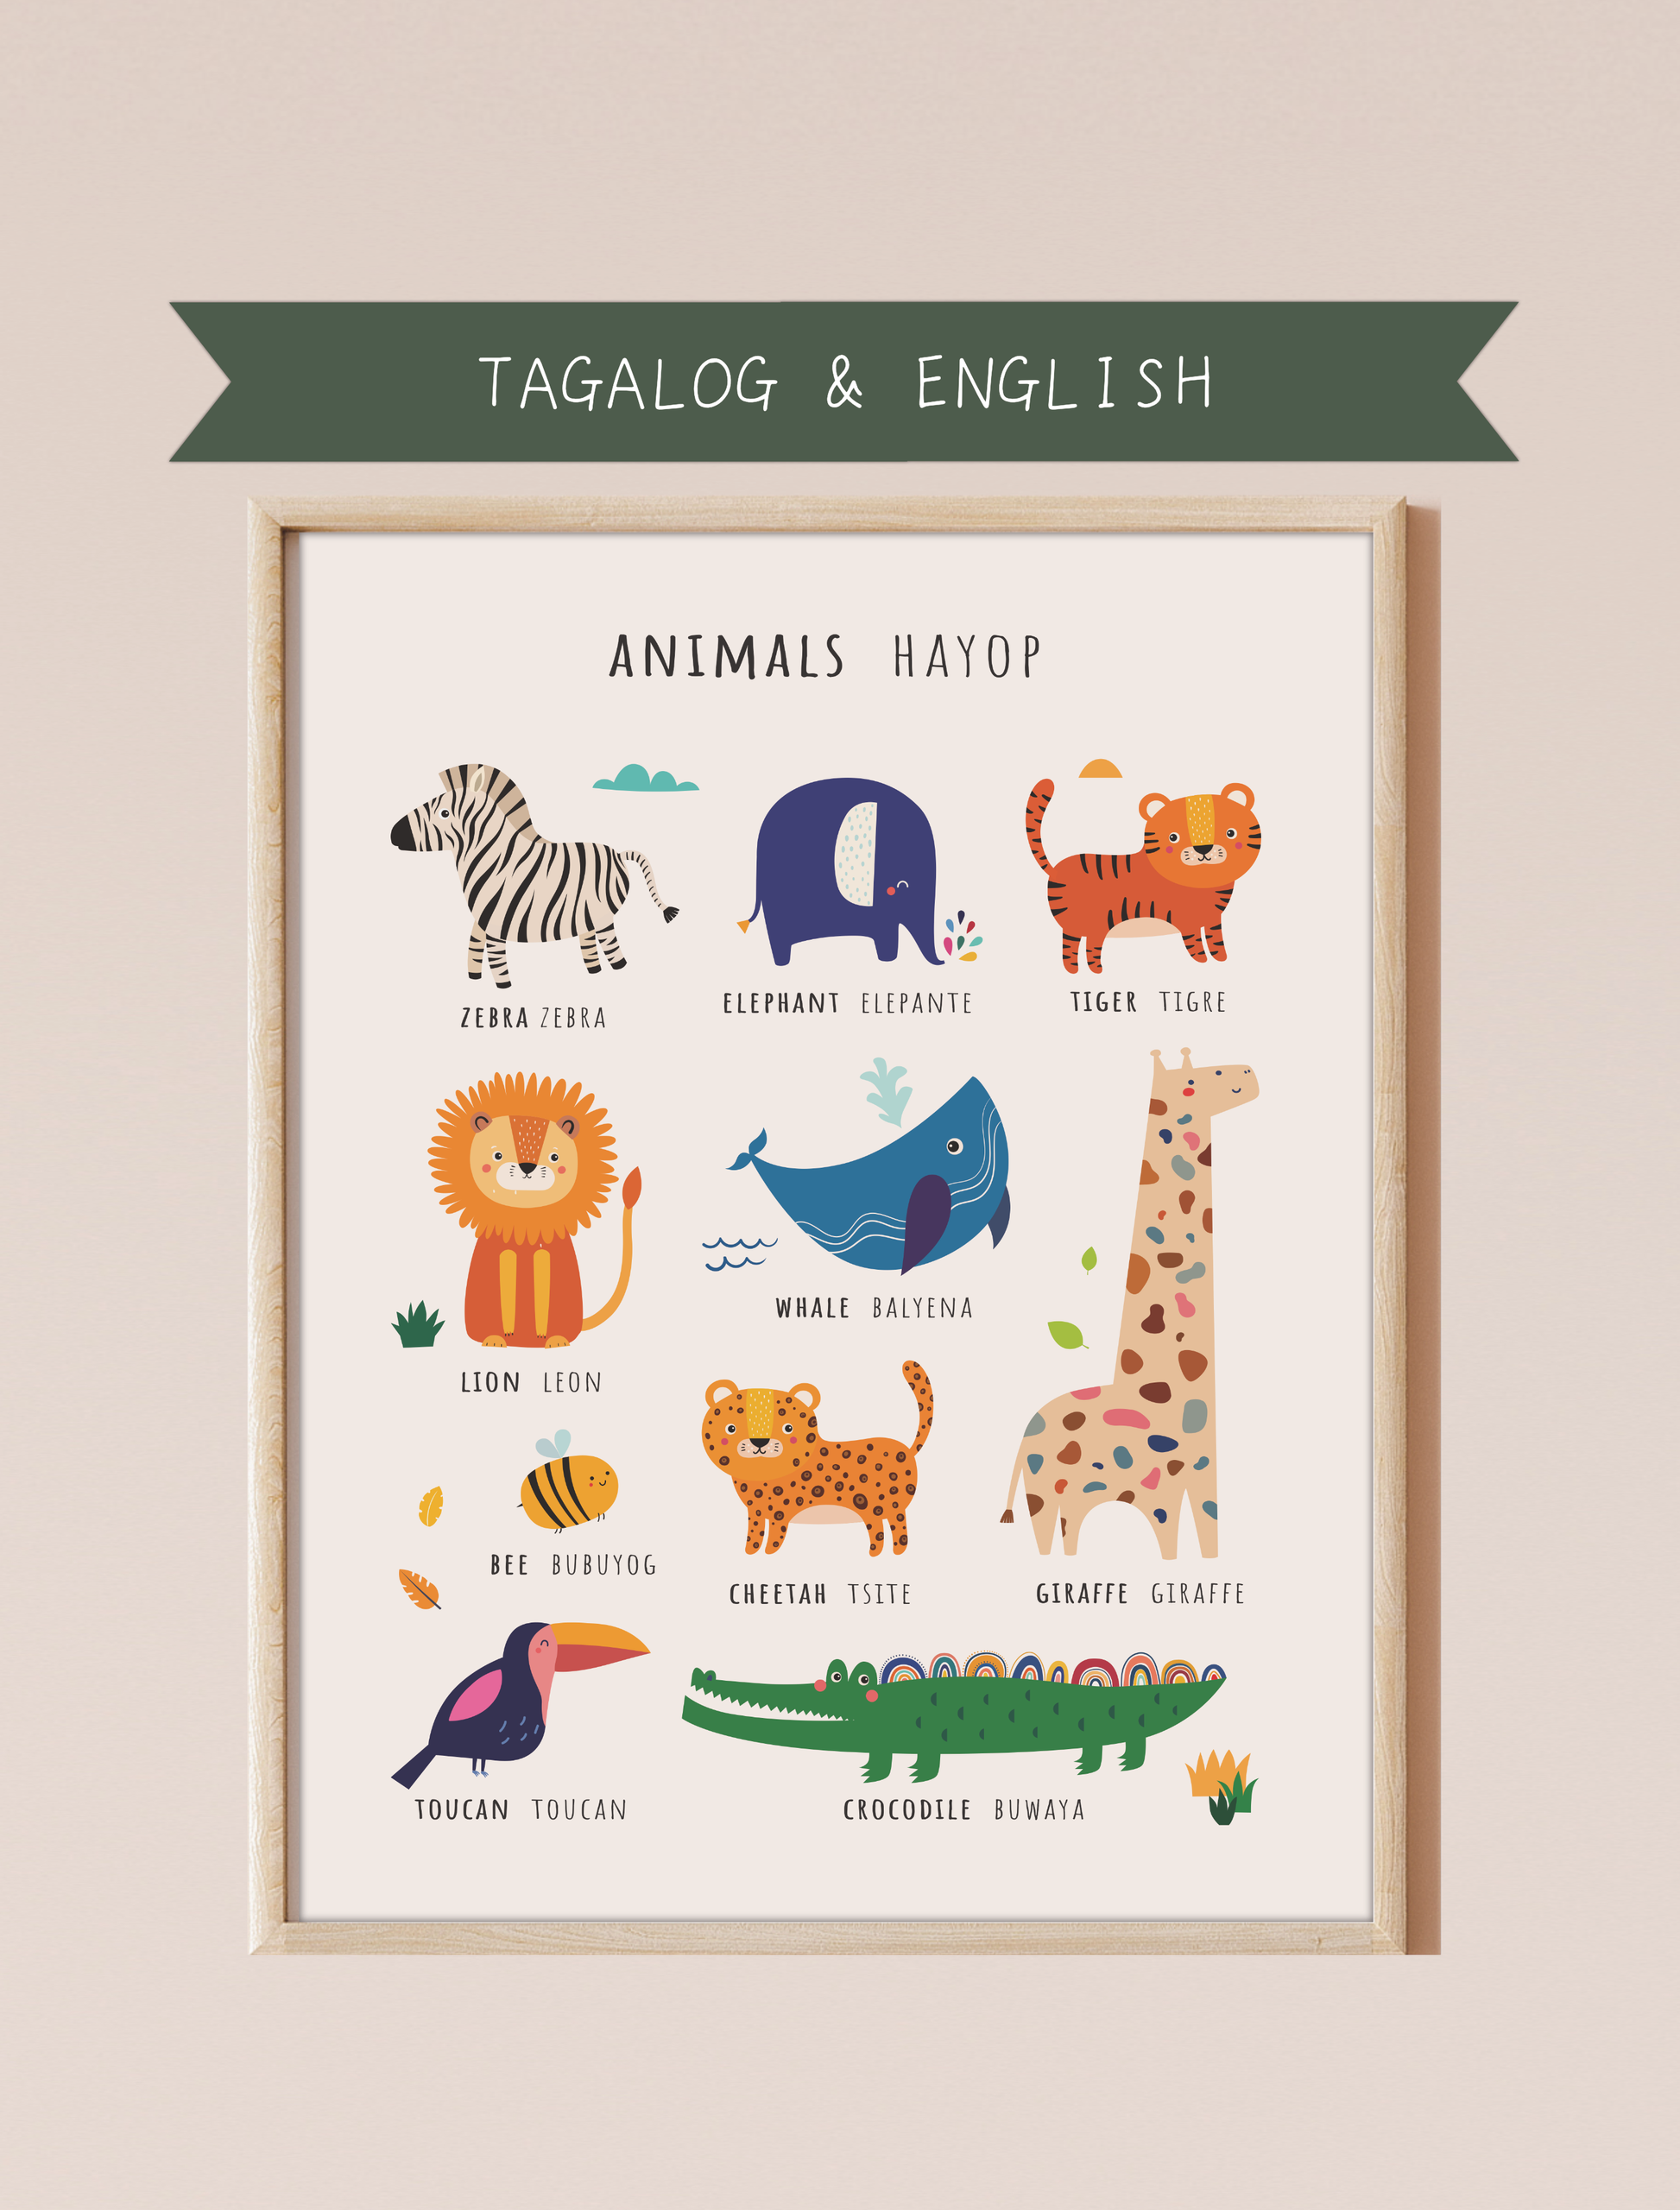 A bilingual educational print featuring animals labeled in English and Tagalog. The print displays cute, colorful illustrations of the following animals: zebra, elephant, tiger, lion, whale, bee, cheetah, giraffe toucan, and crocodile . This bilingual display aids in language acquisition and cross-cultural learning.